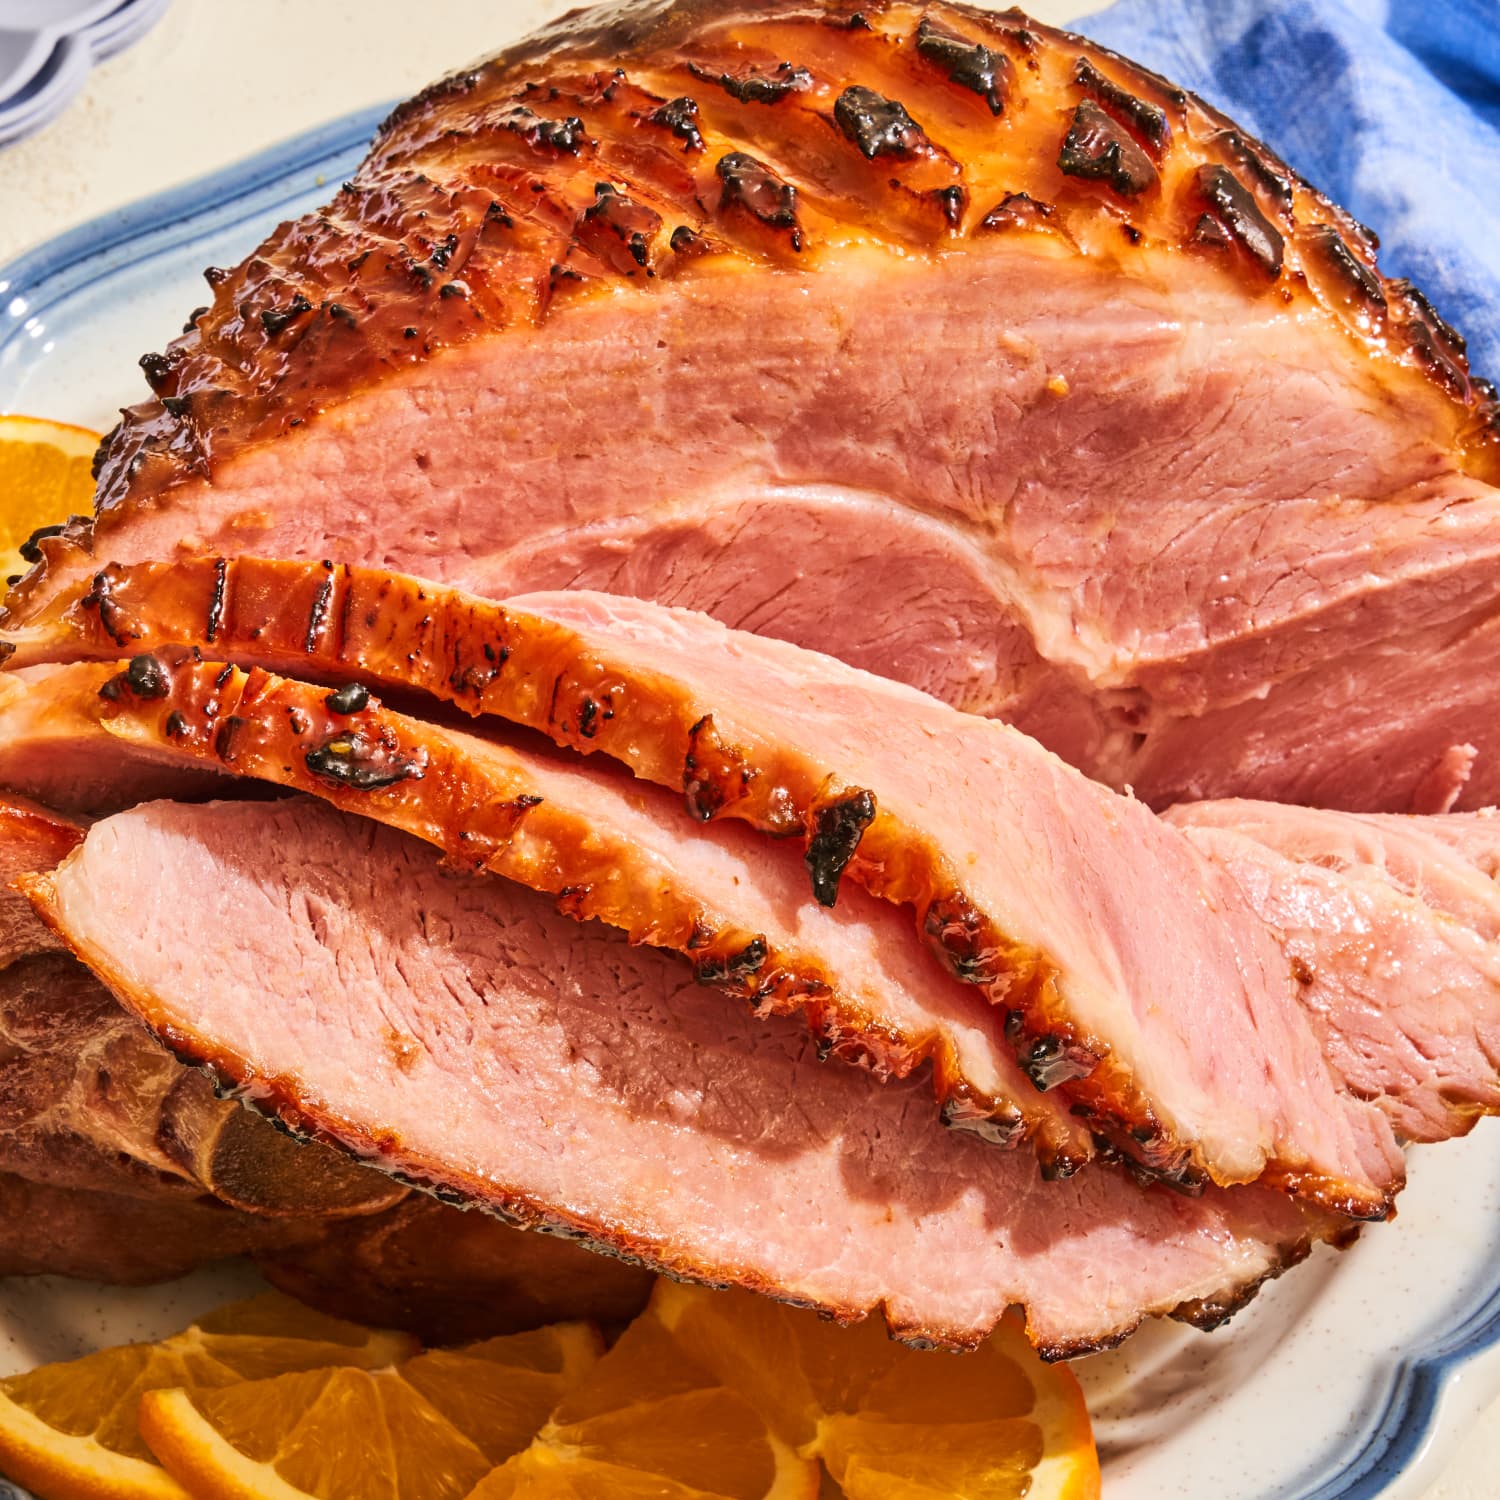 Formed ham is made up of many meat cuts